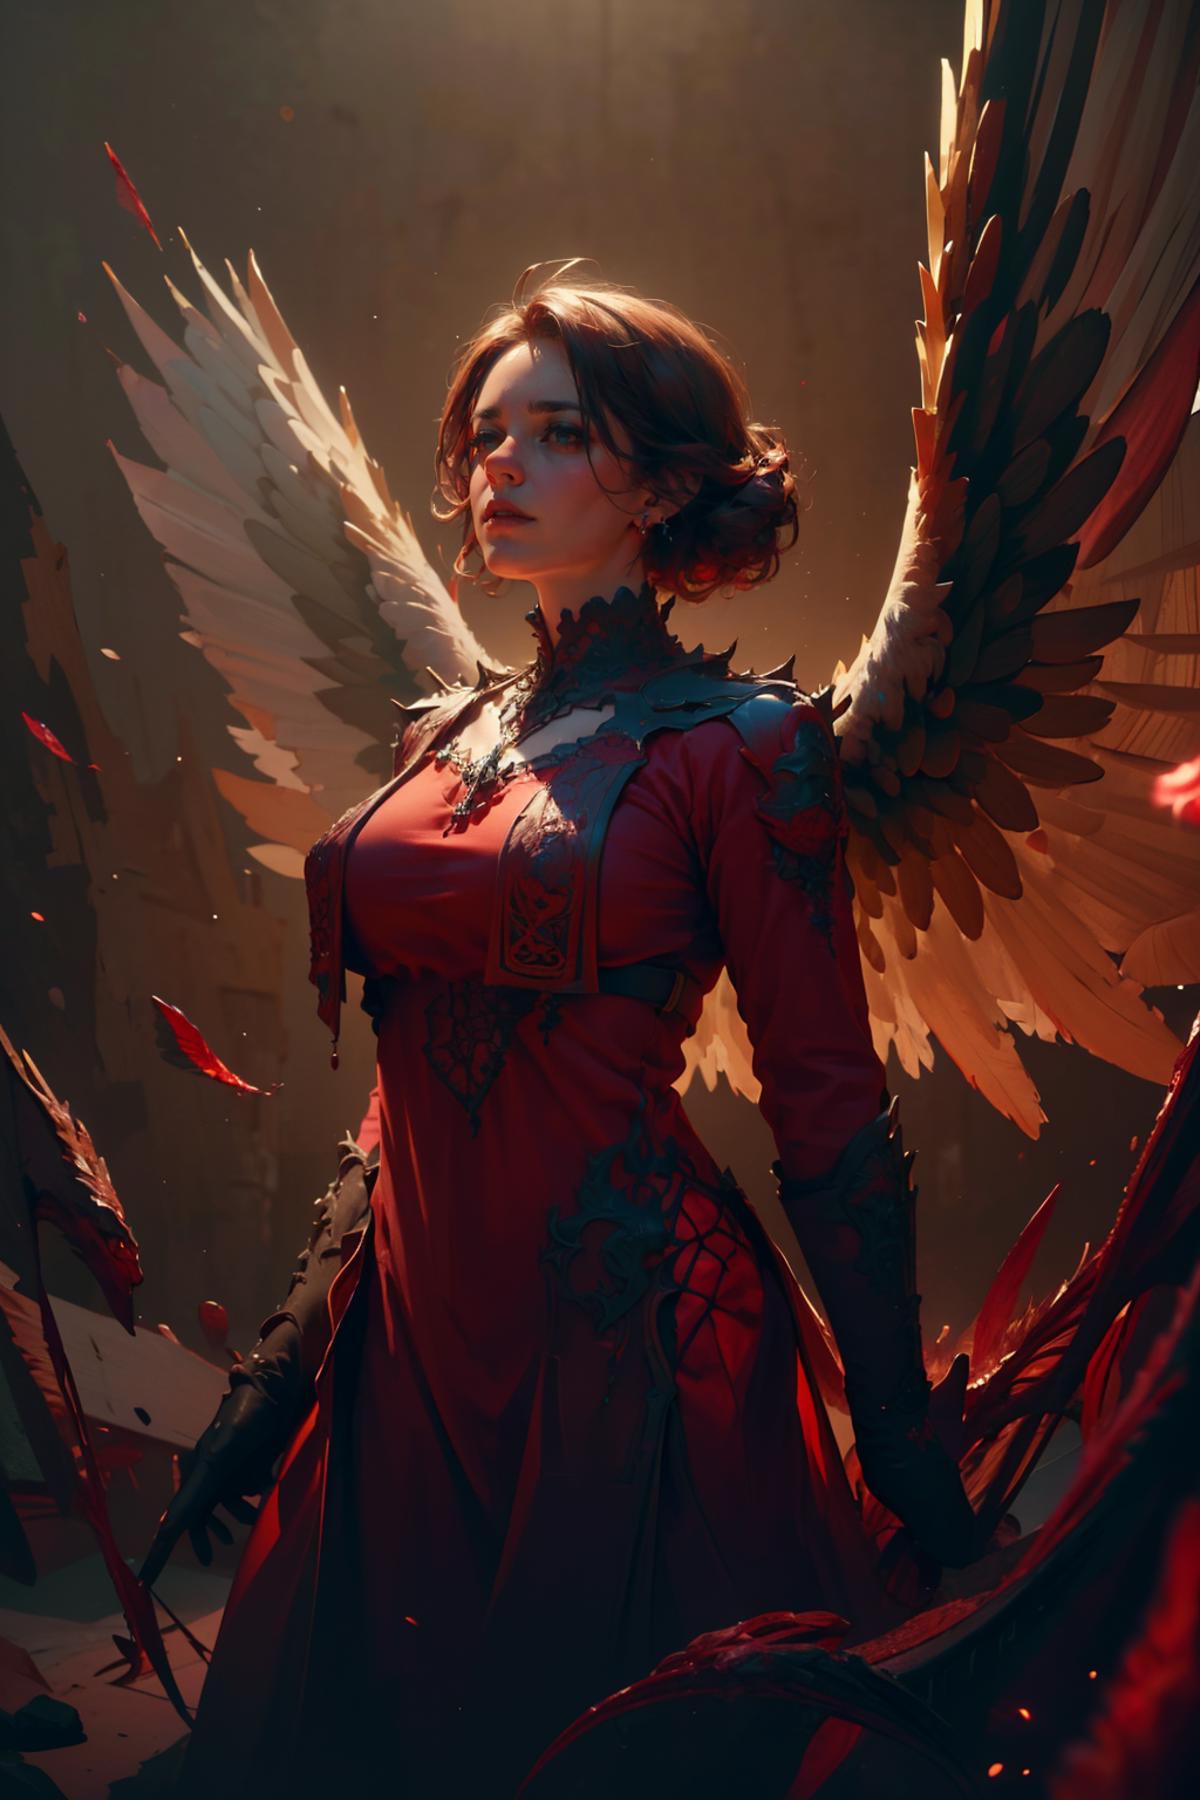 A fantasy artwork of a woman with angel wings and a red dress.